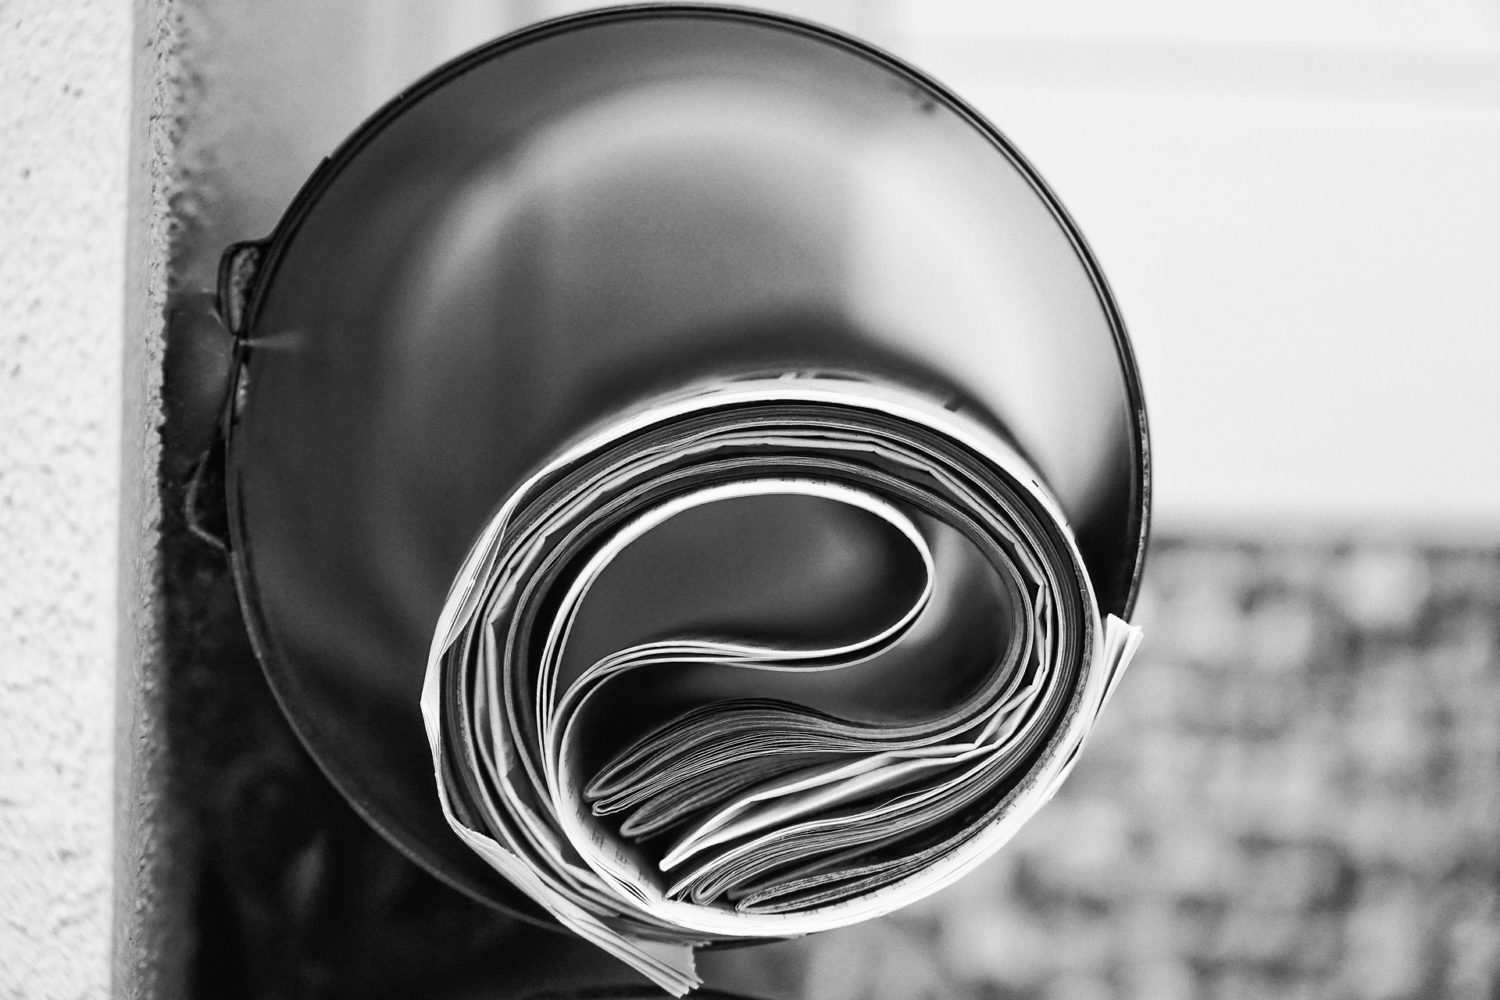 Black and white image of newspaper rolled up inside of tube